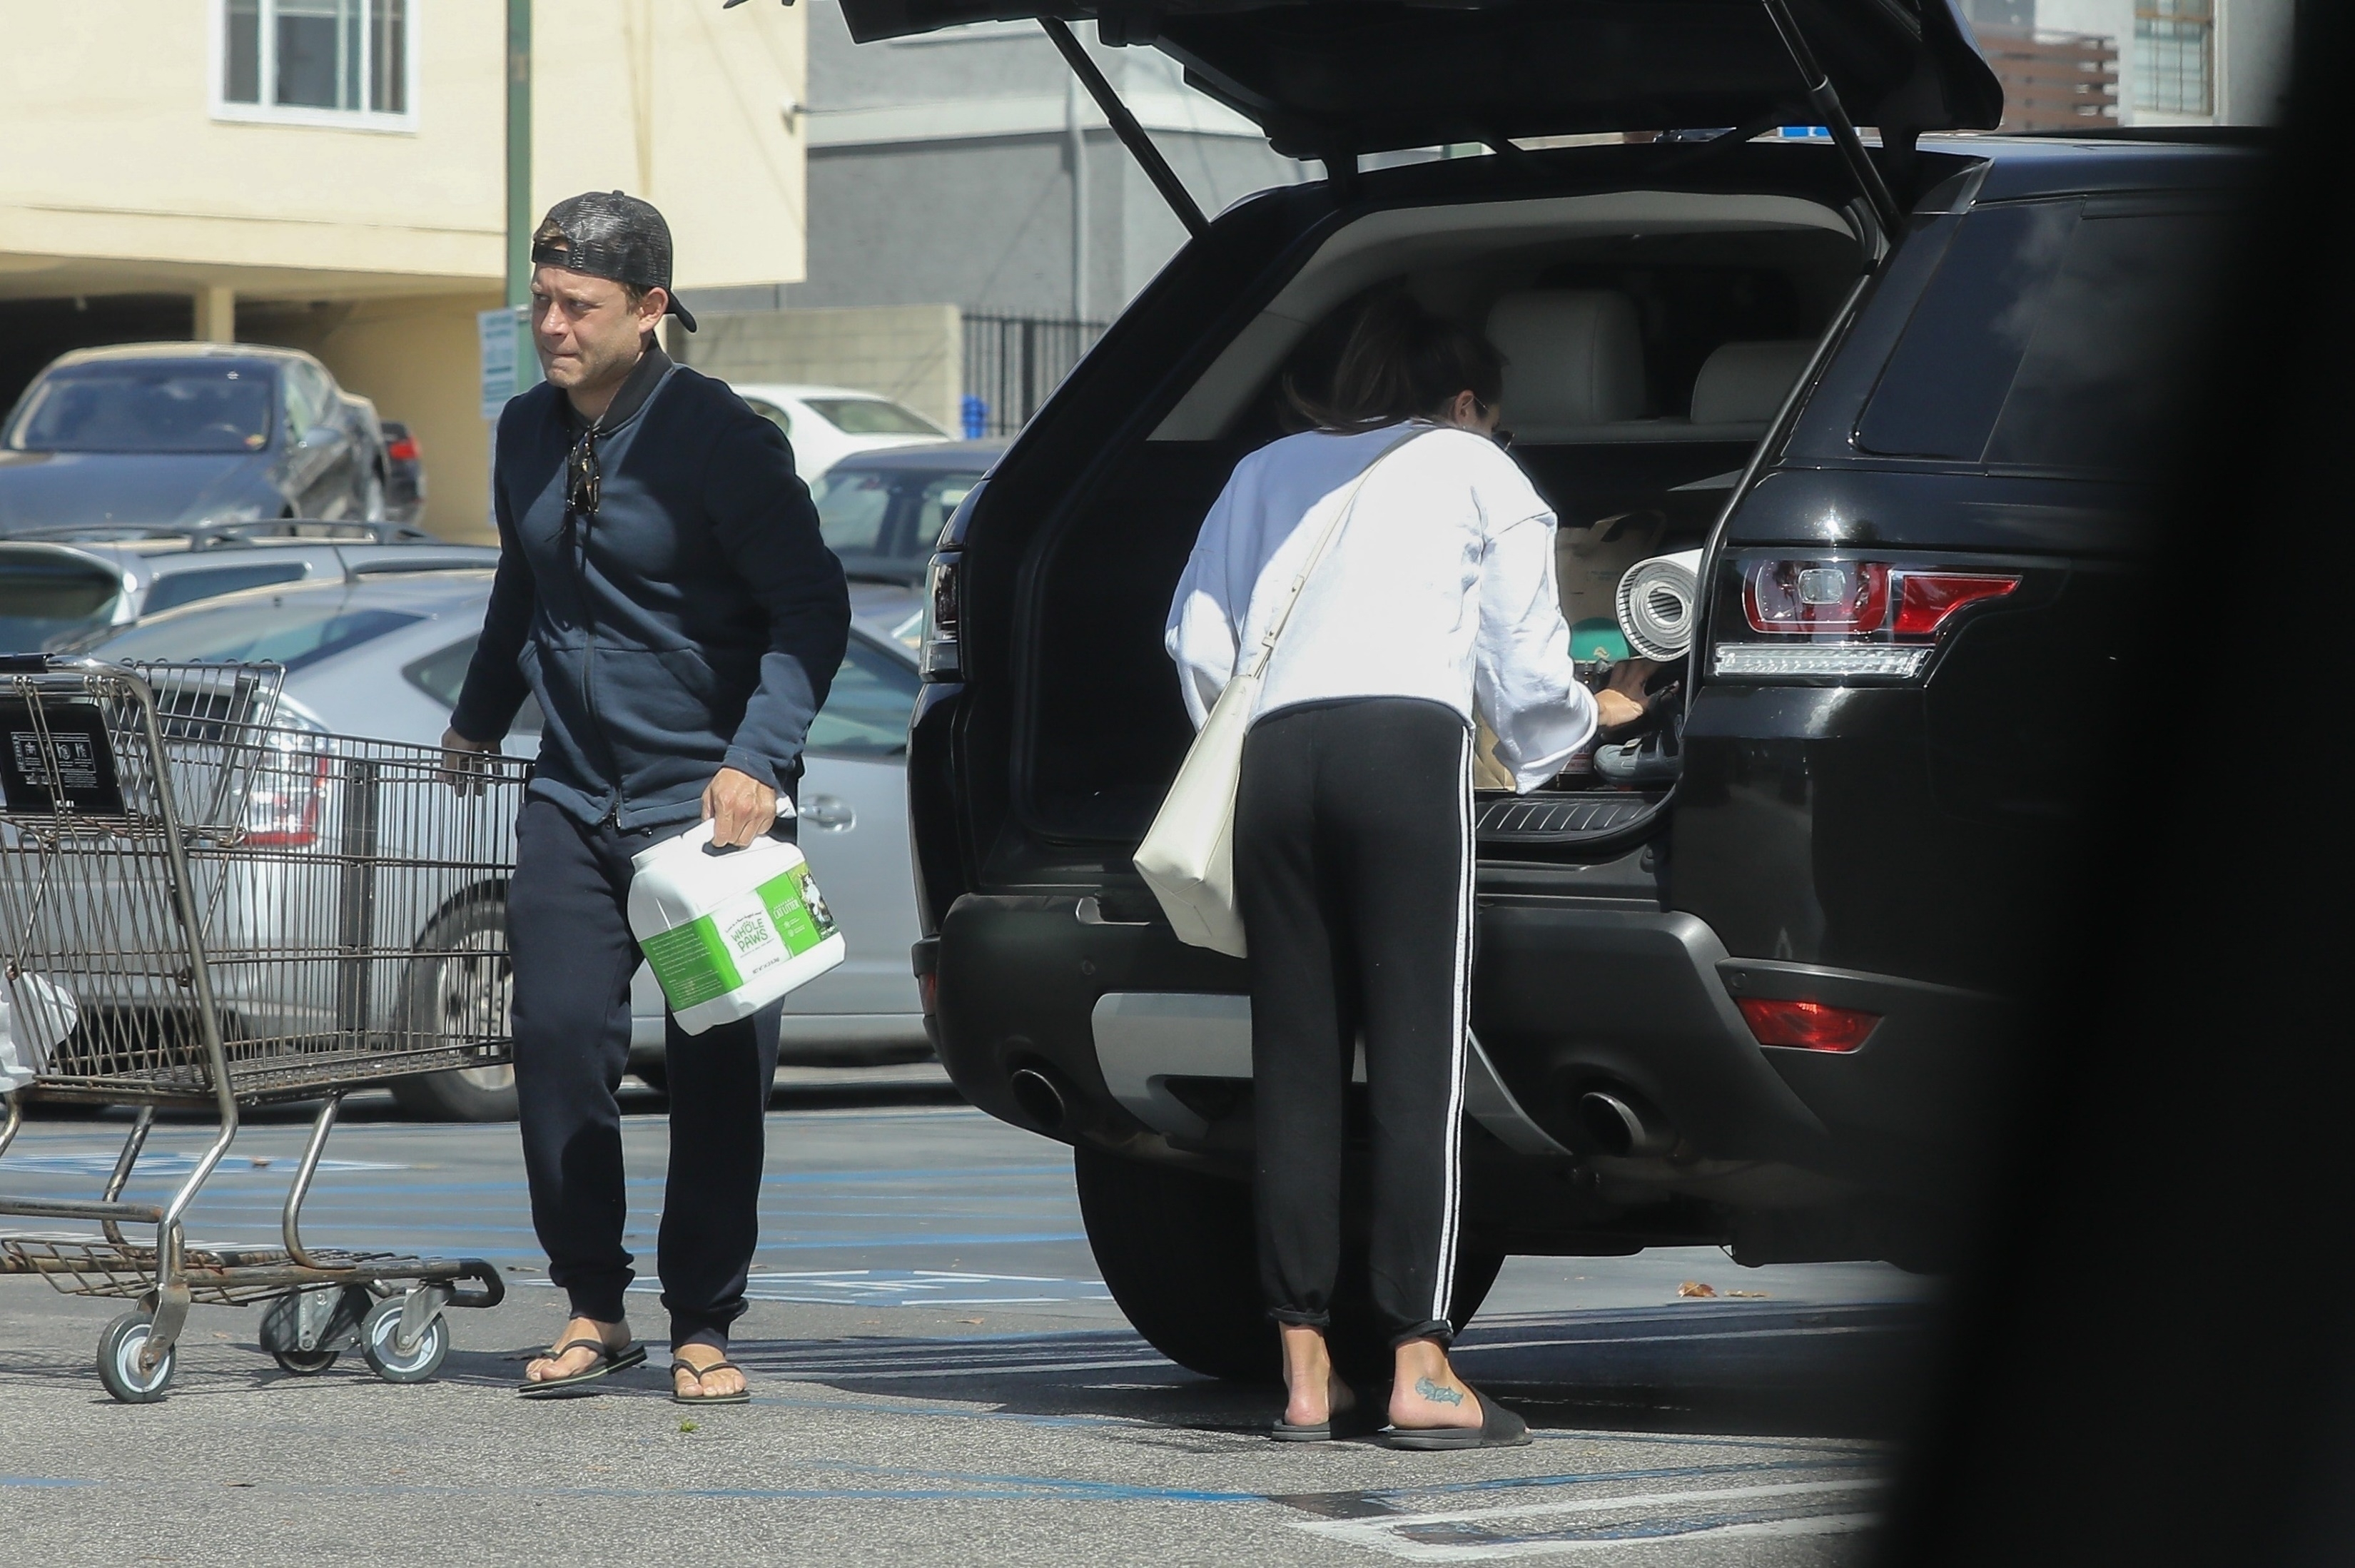 lea-michele-at-whole-foods-with-z-10072018-10.jpg